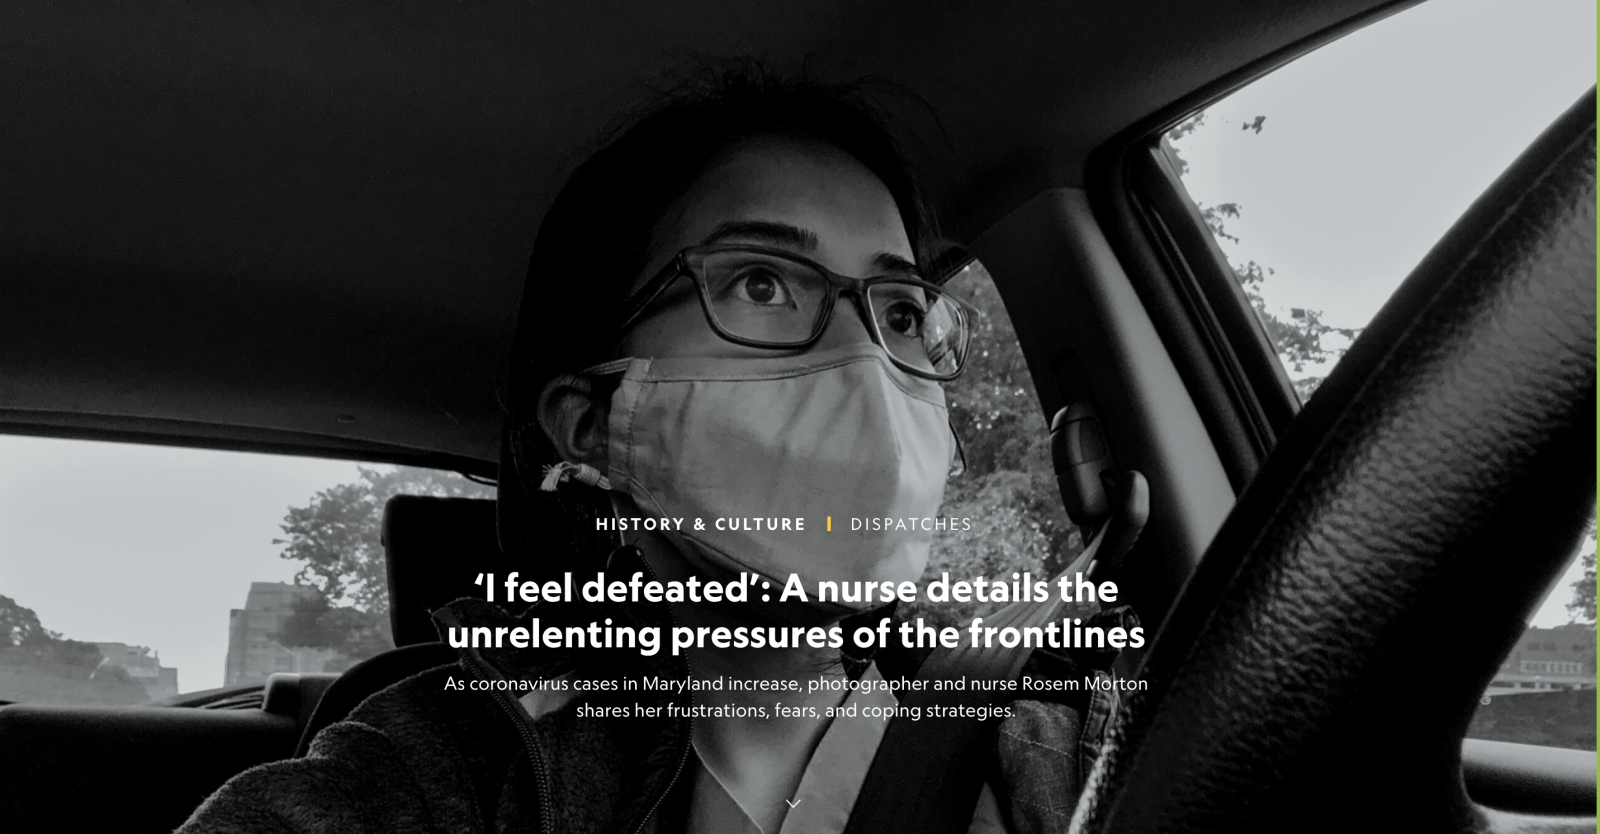 on National Geographic: "˜I feel defeated': A nurse details the unrelenting pressures of the frontlines